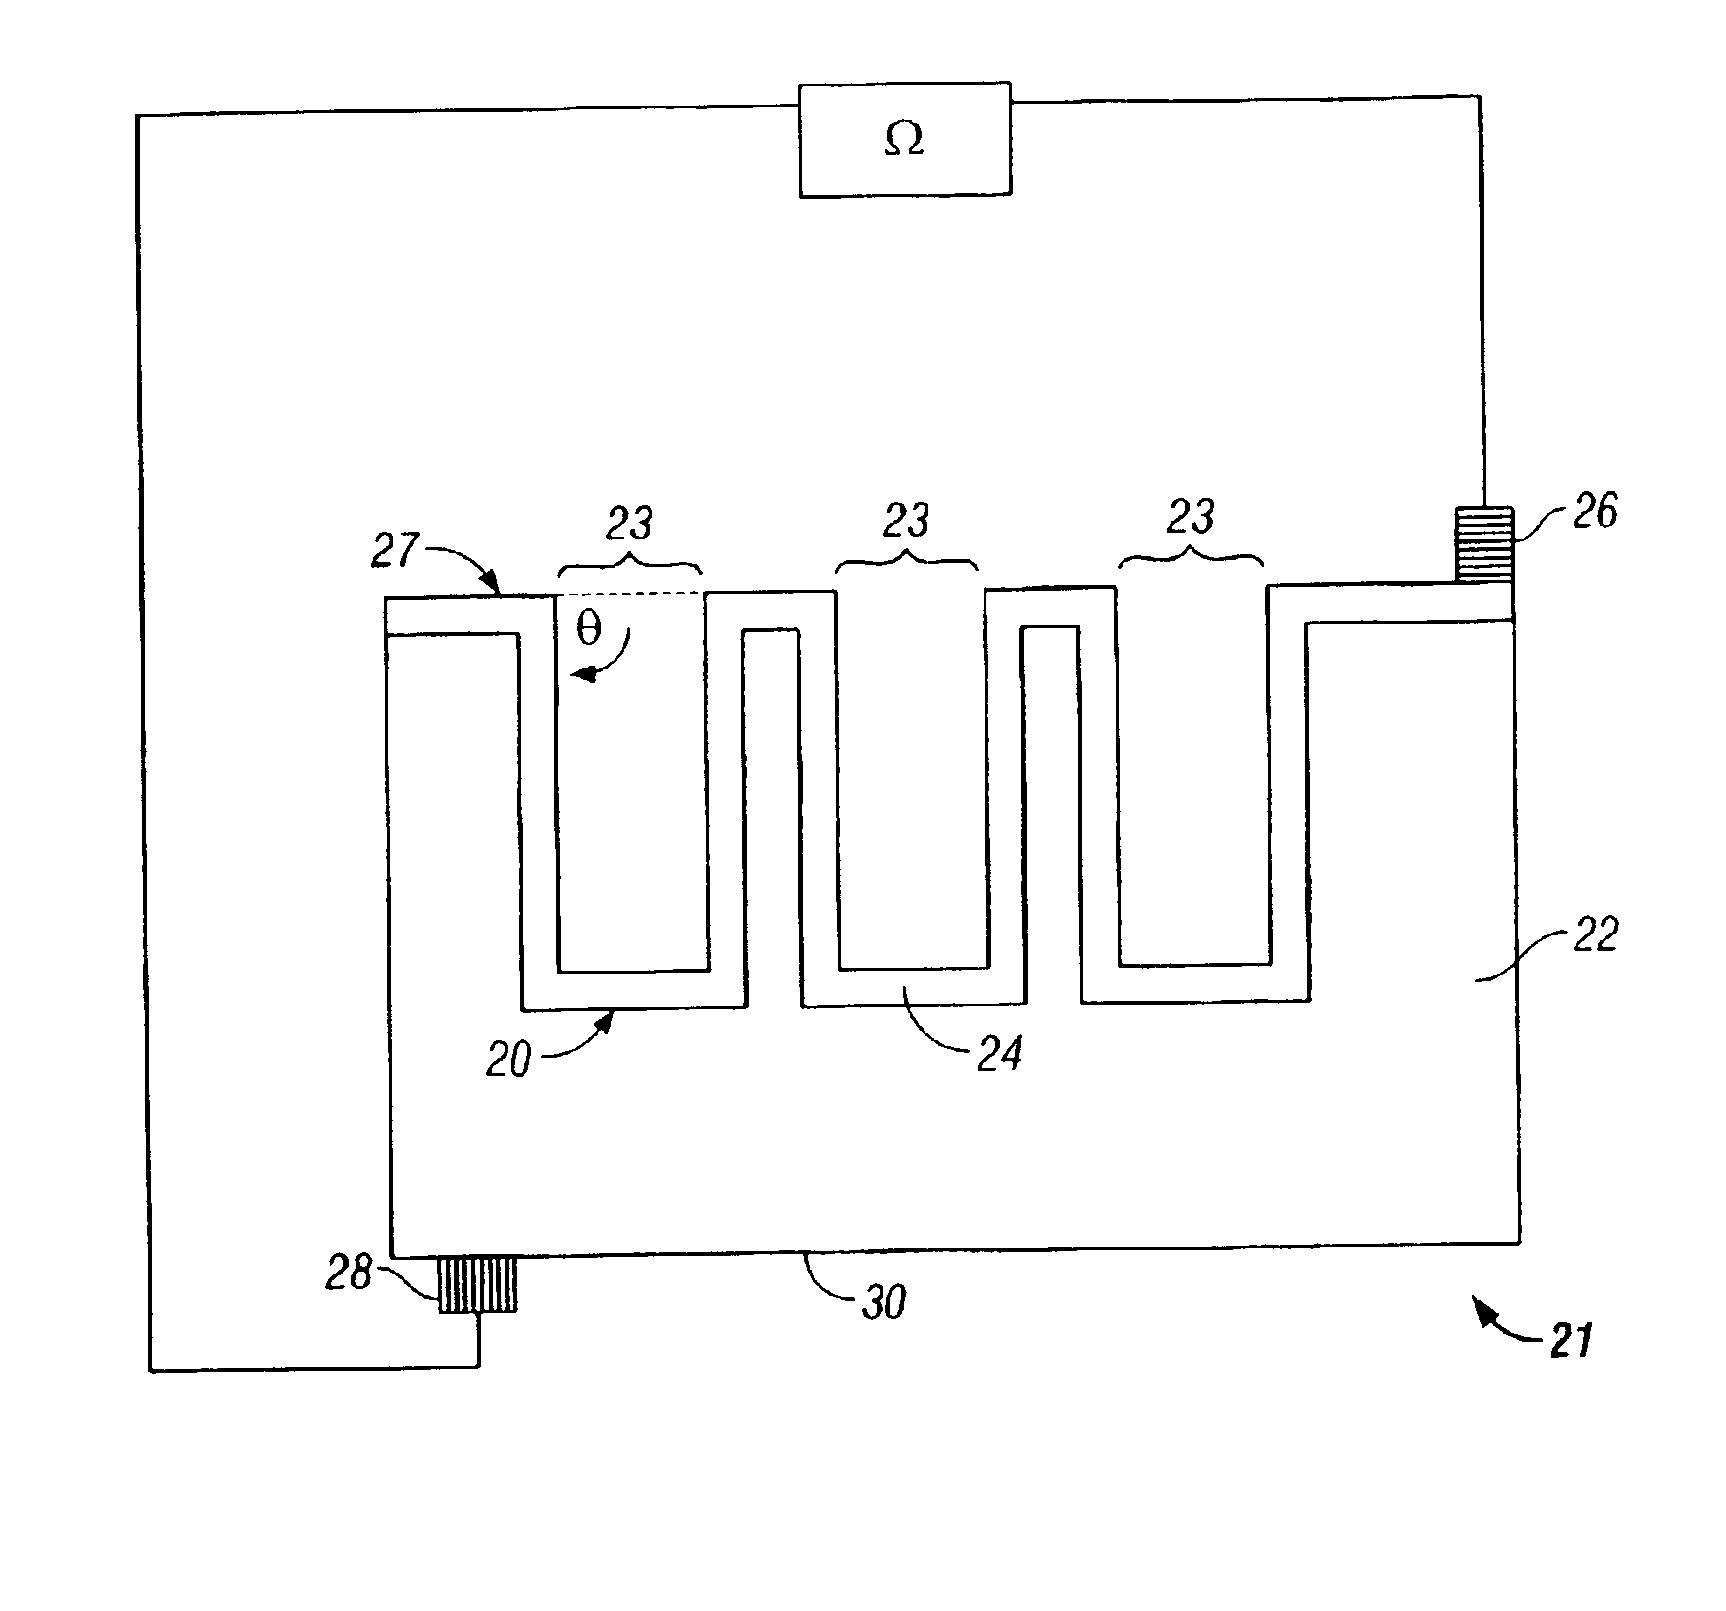 Apparatus and method for generating electrical current from the nuclear decay process of a radioactive material